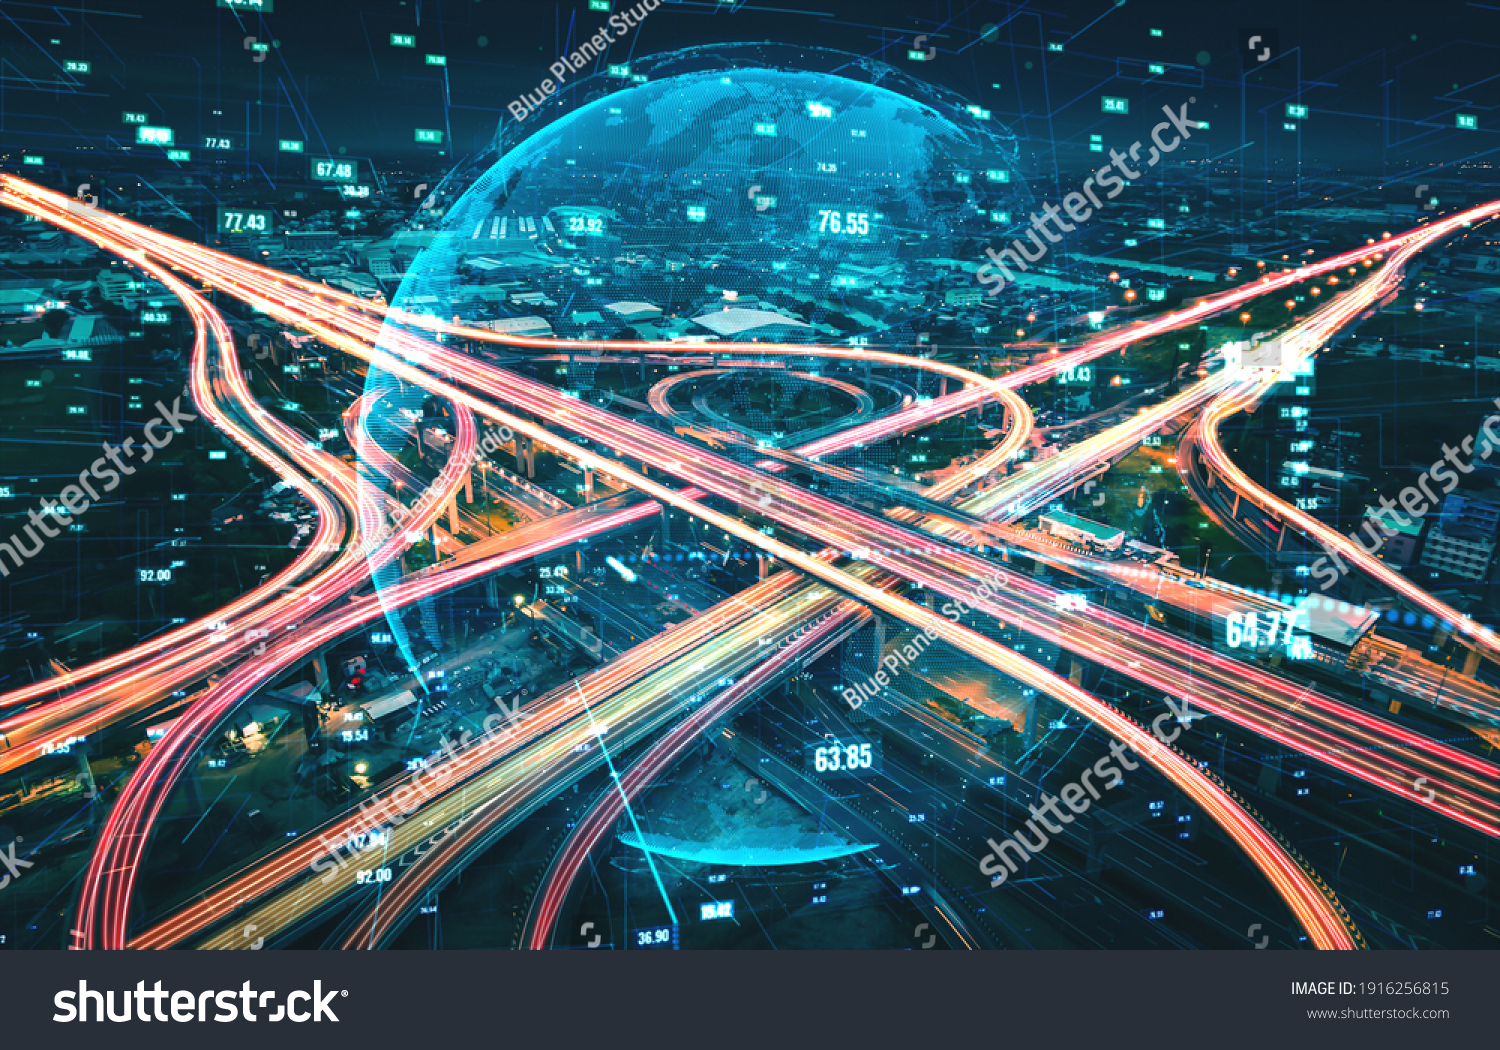 Futuristic road transportation technology with digital data transfer graphic showing concept of traffic big data analytic and internet of things . #1916256815